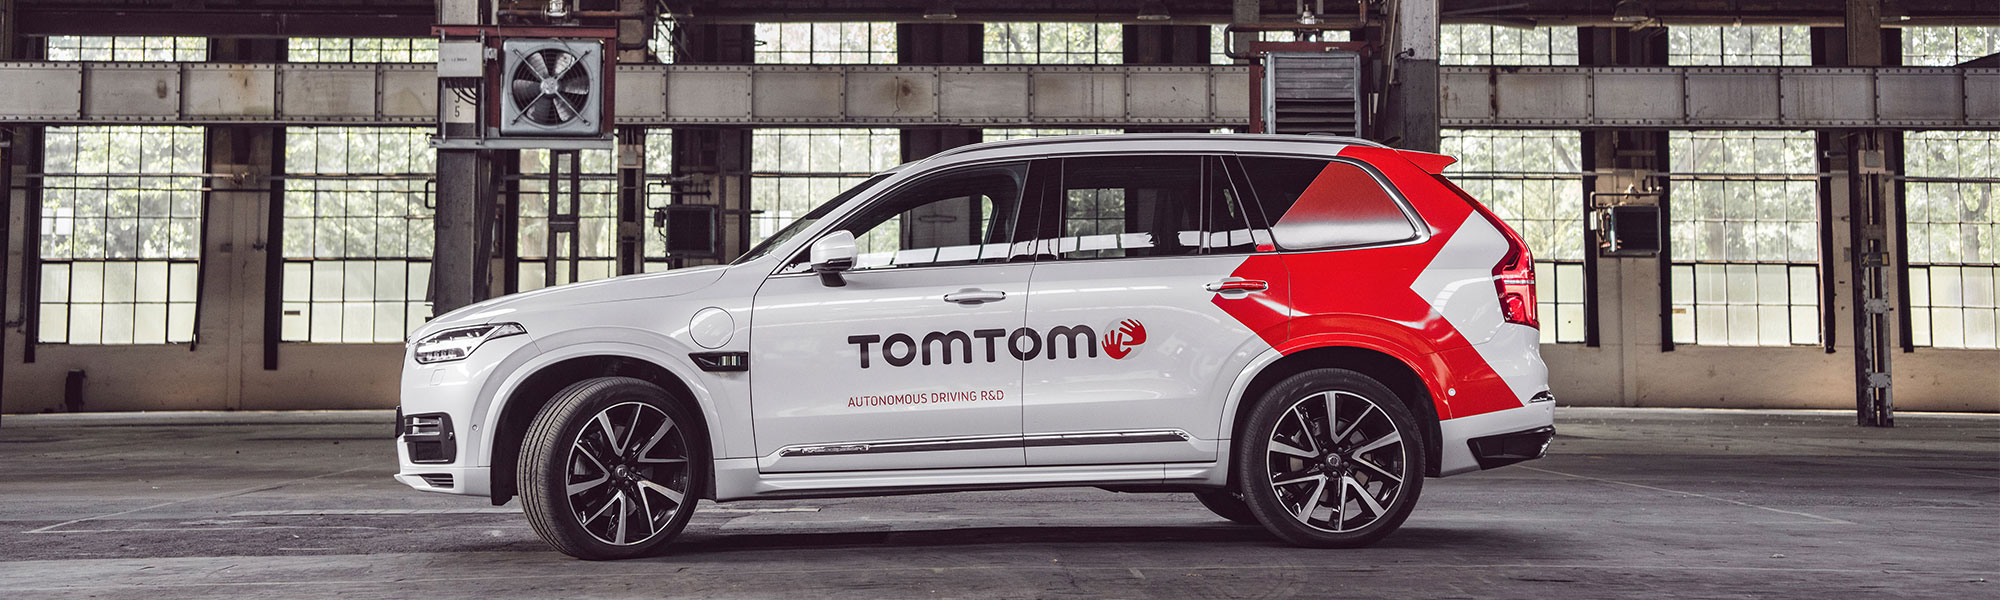 How does TomTom’s self-driving test car help developers make better HD maps?